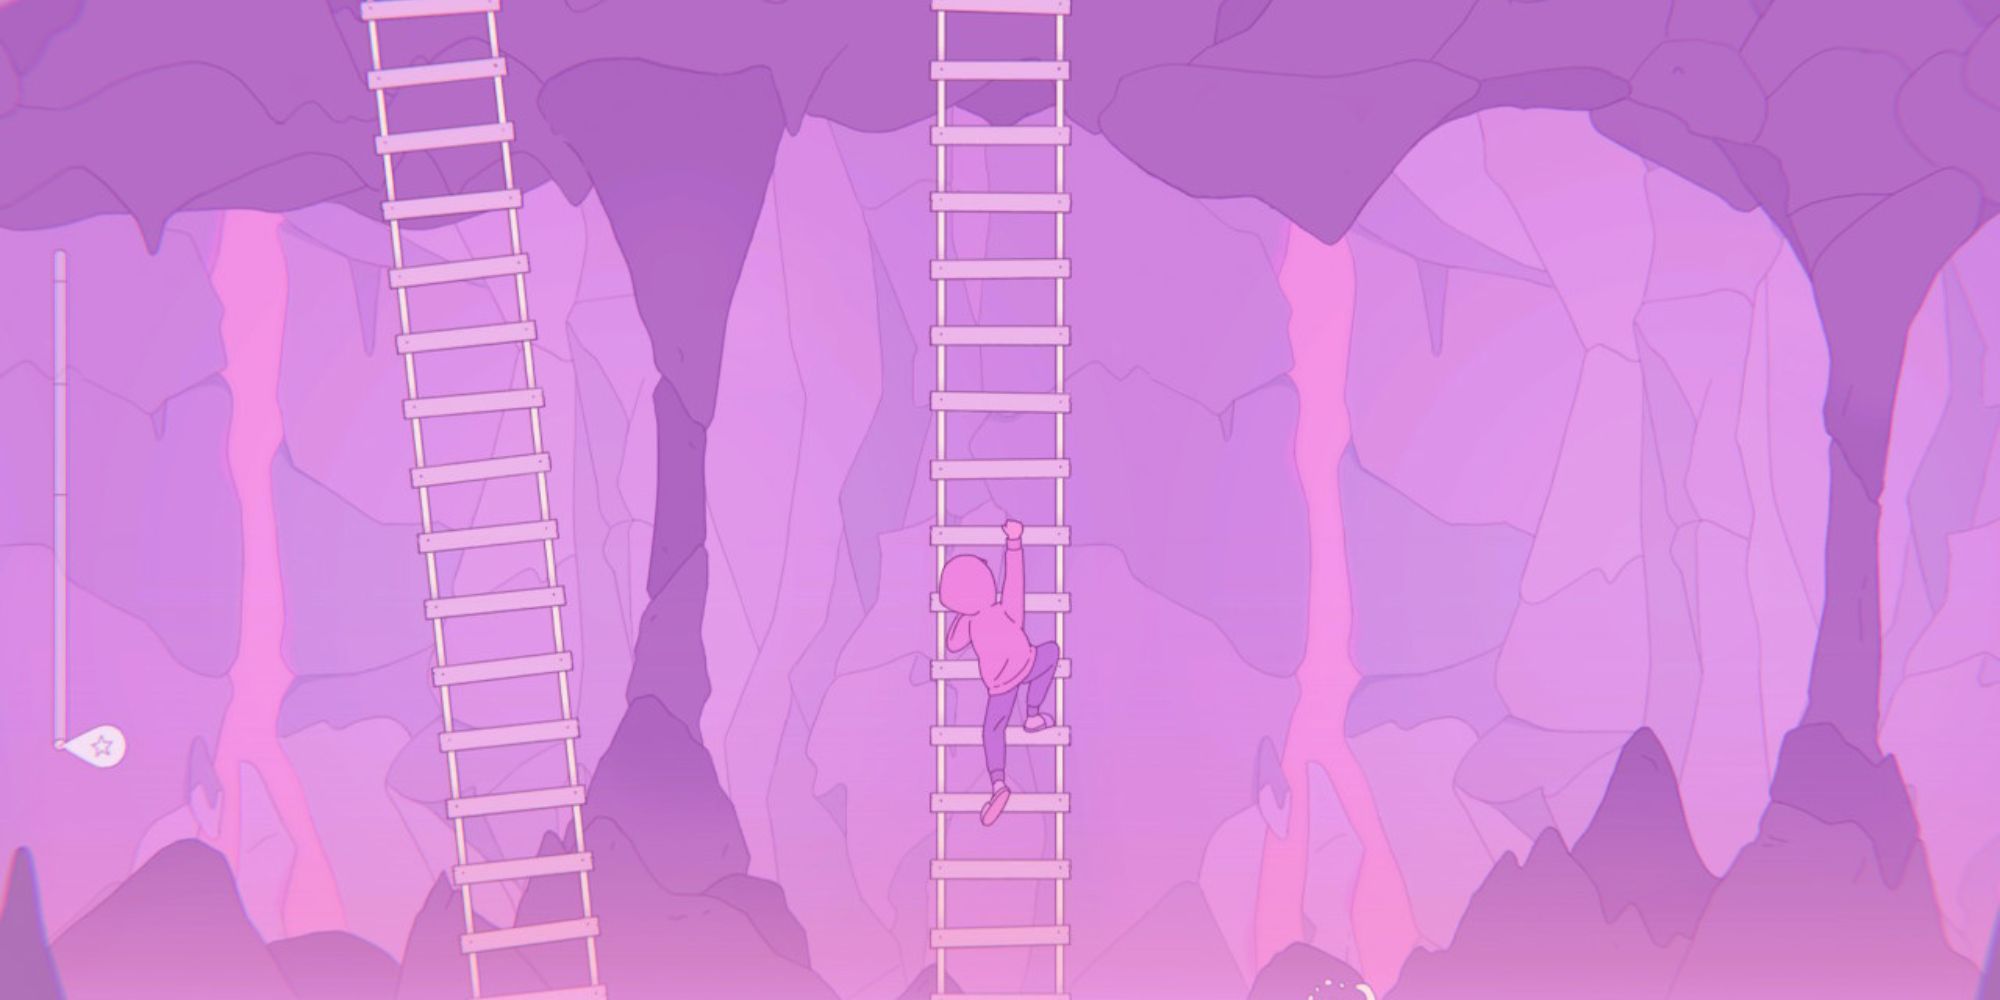 The protagonist climbs a ladder through a cave in Melatonin